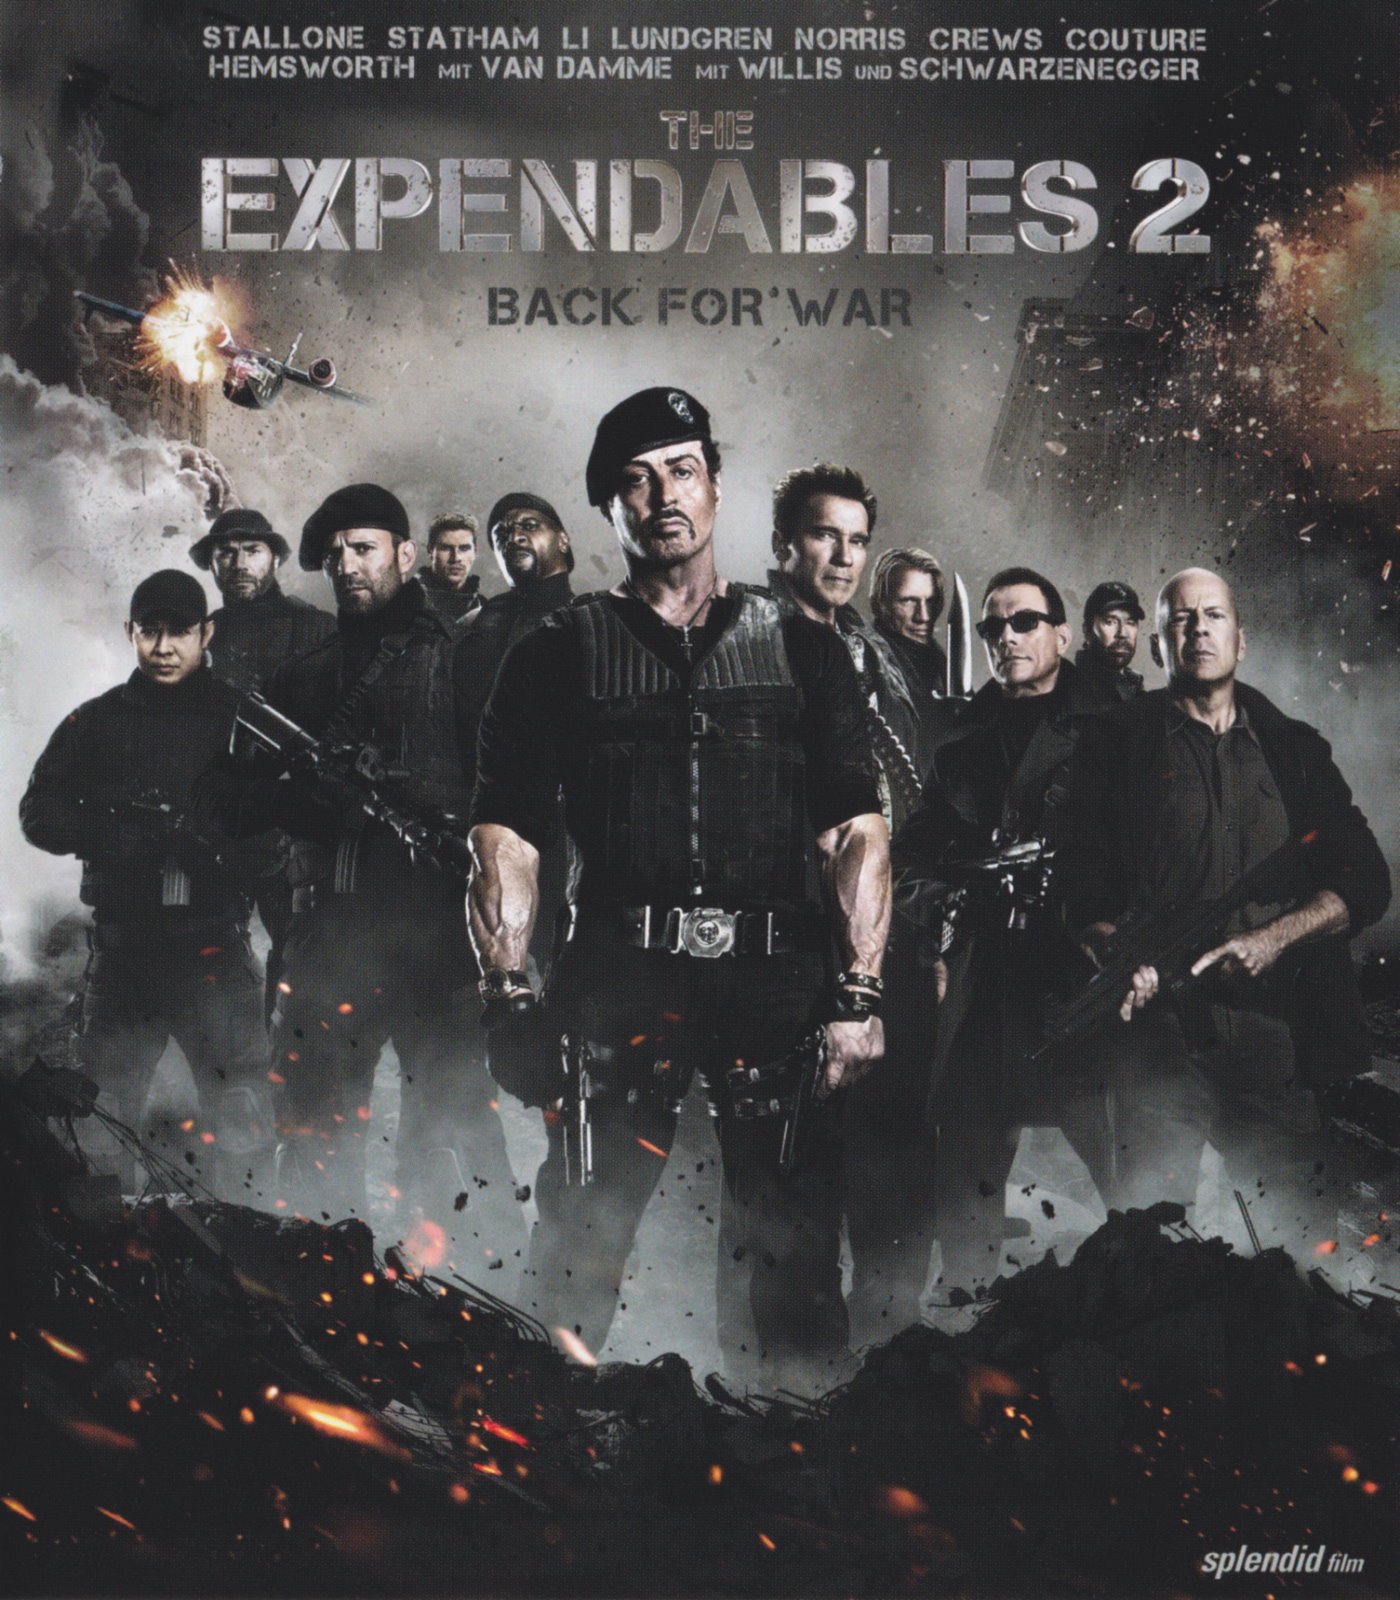 Cover - The Expendables 2.jpg